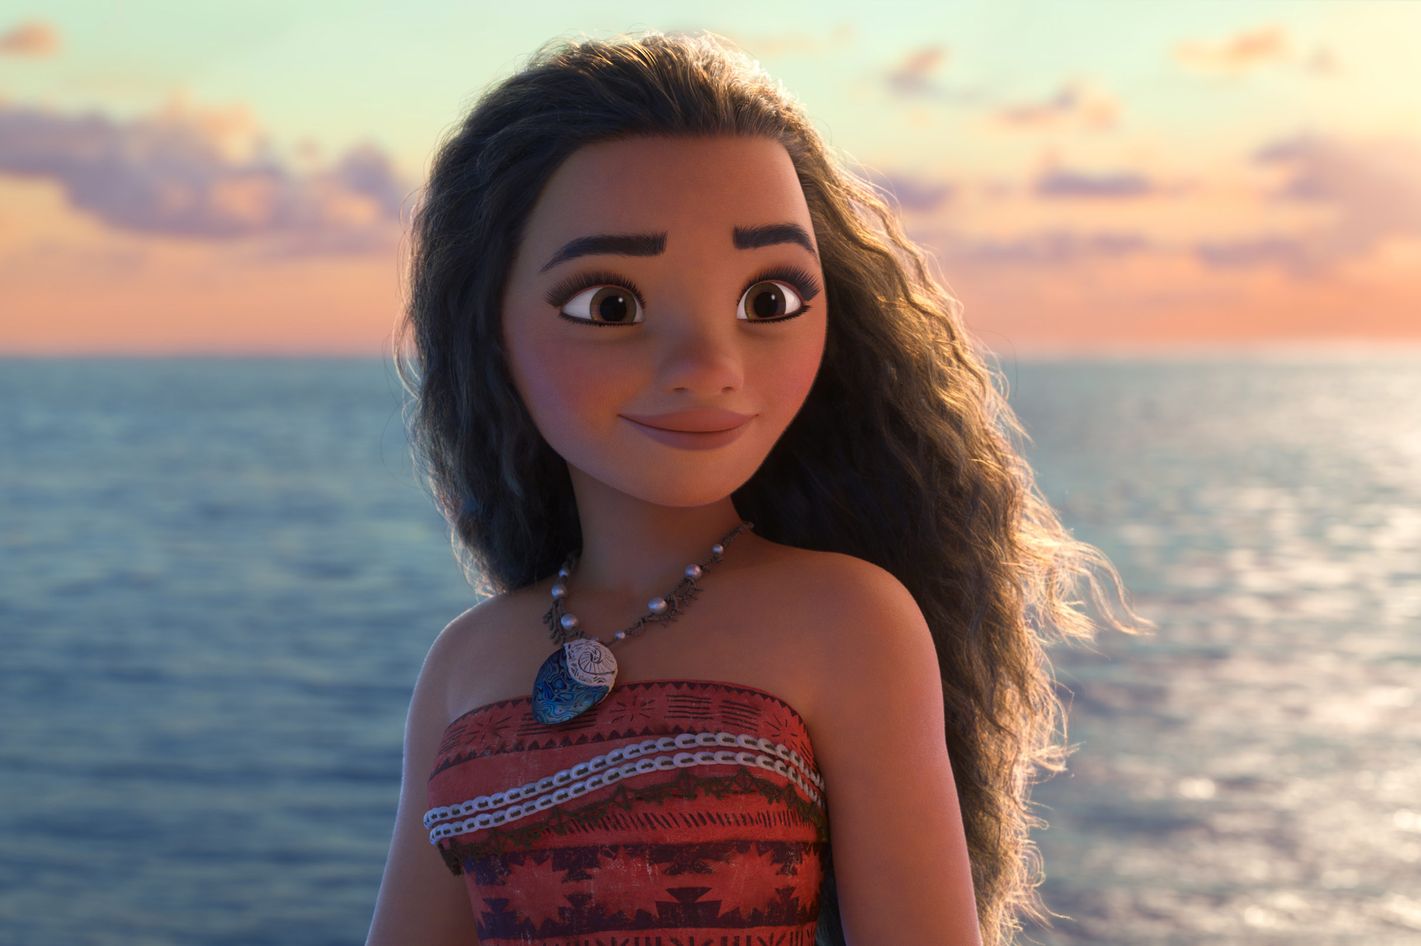 Alison Star Porn Videos - Disney's Moana Was Renamed in Italy to Reportedly Avoid Confusion With a Porn  Star